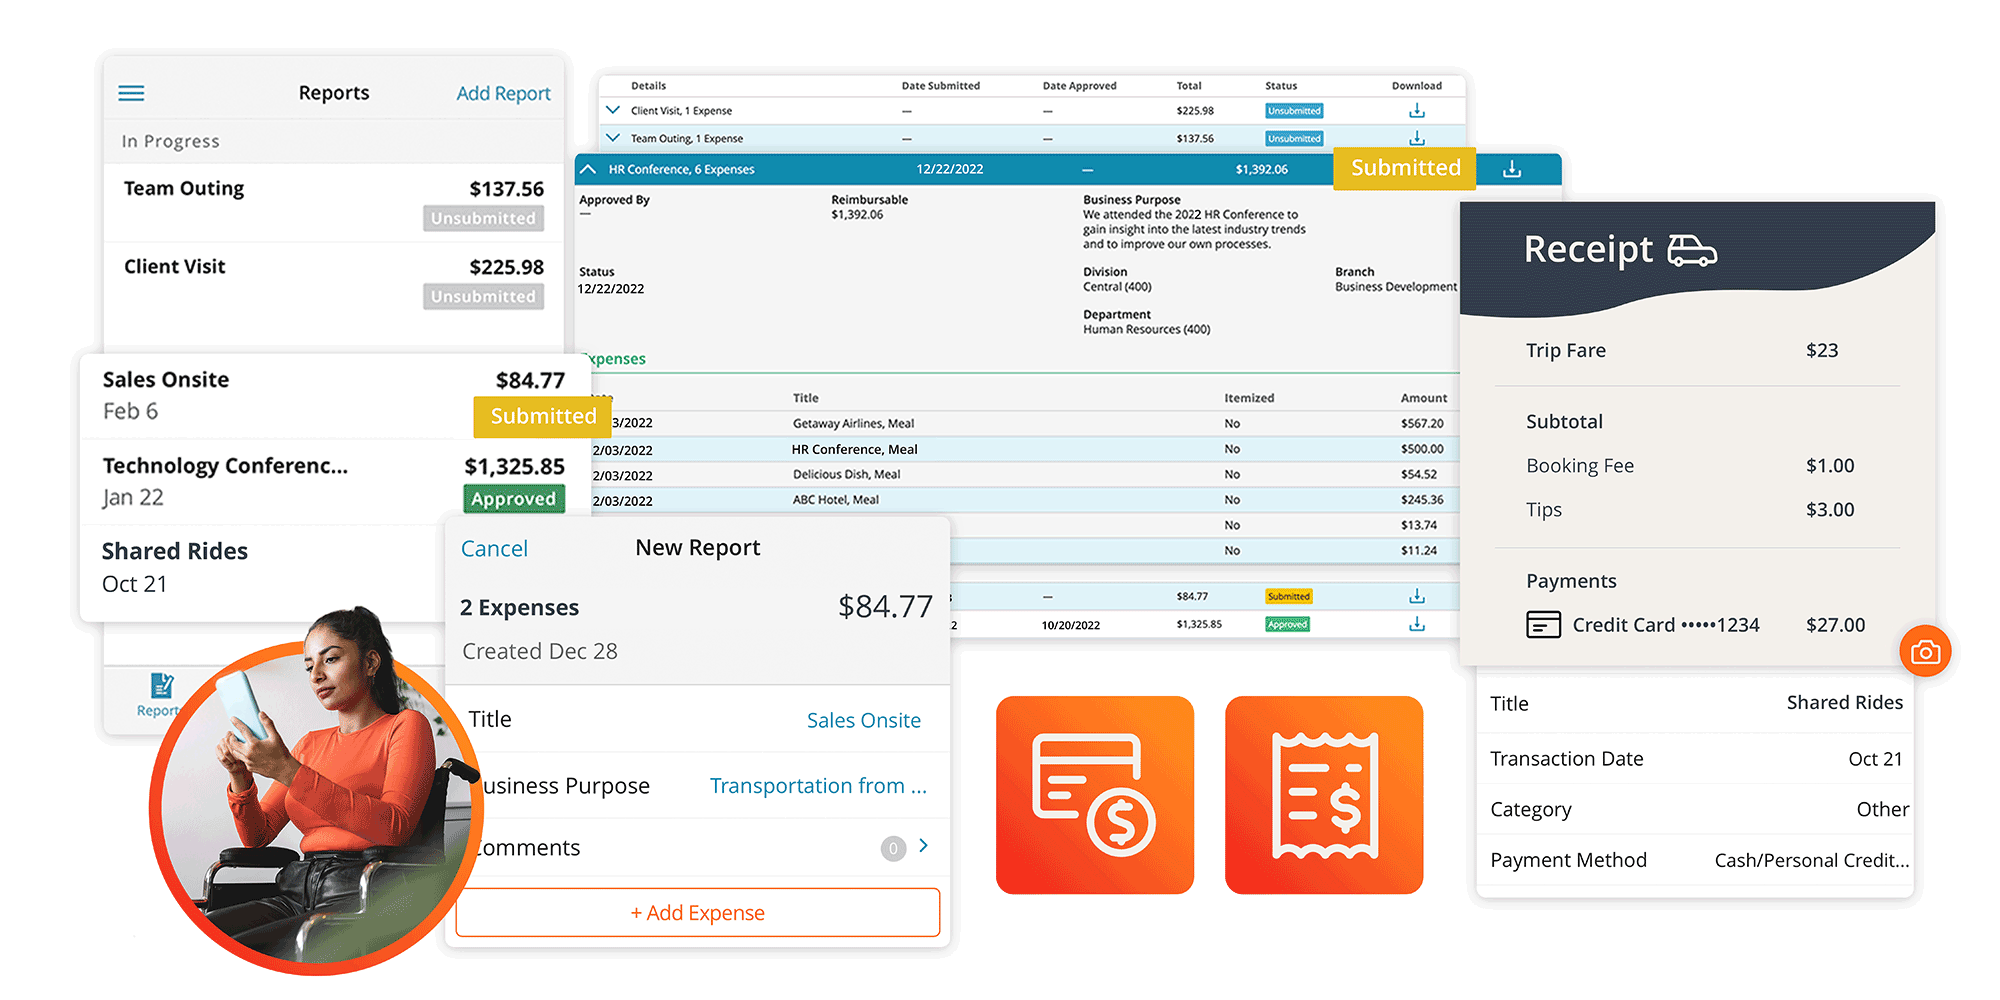 Screenshots of expense reporting and receipt upload within Paylocity's platform